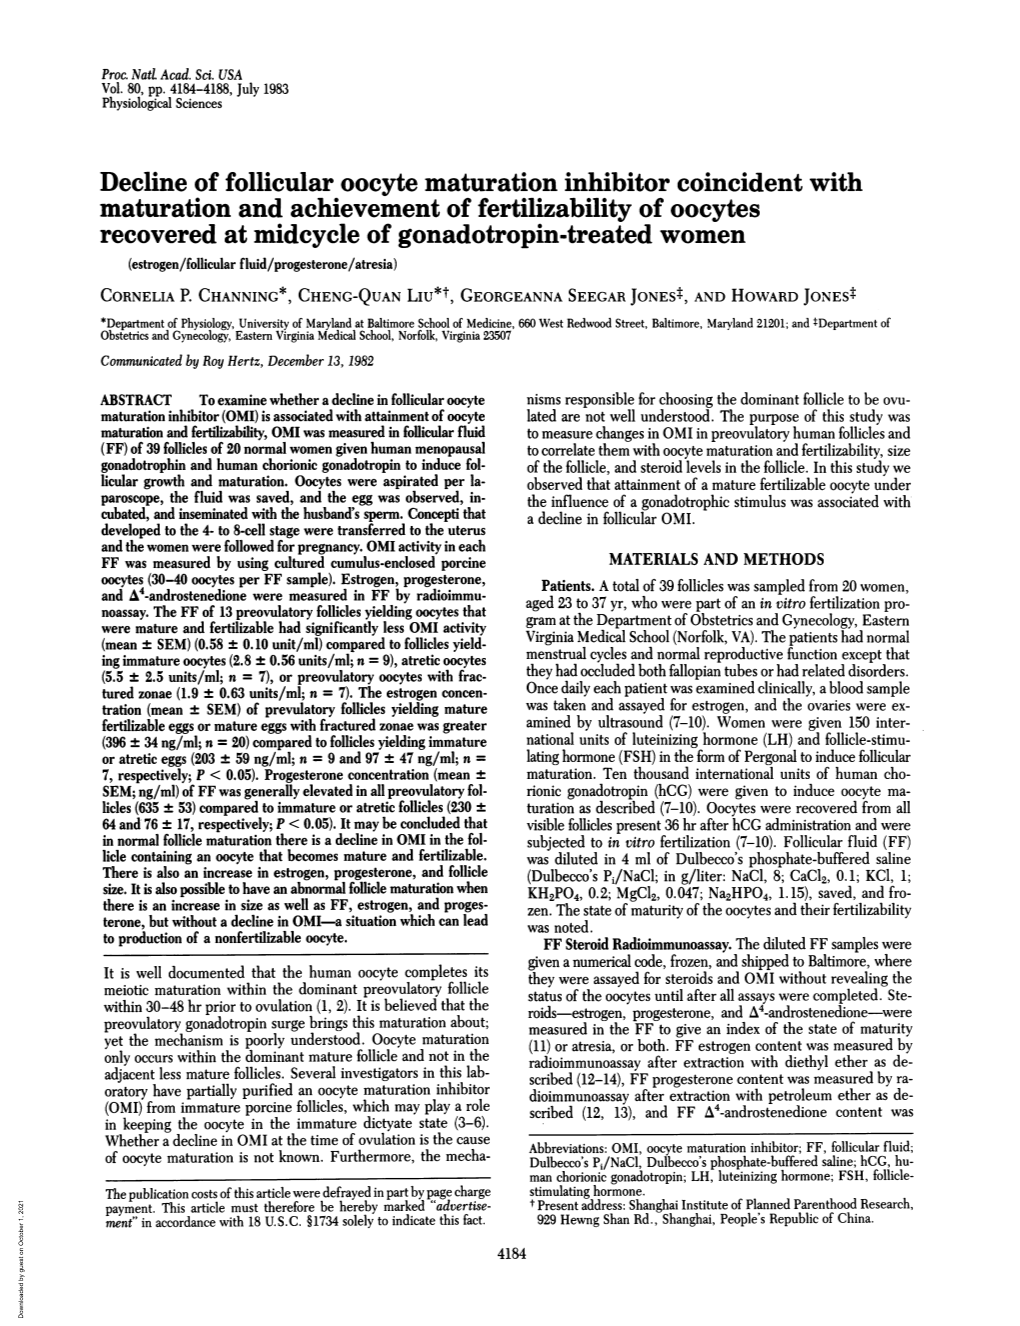 Decline of Follicular Oocyte Maturation Inhibitor Coincident With